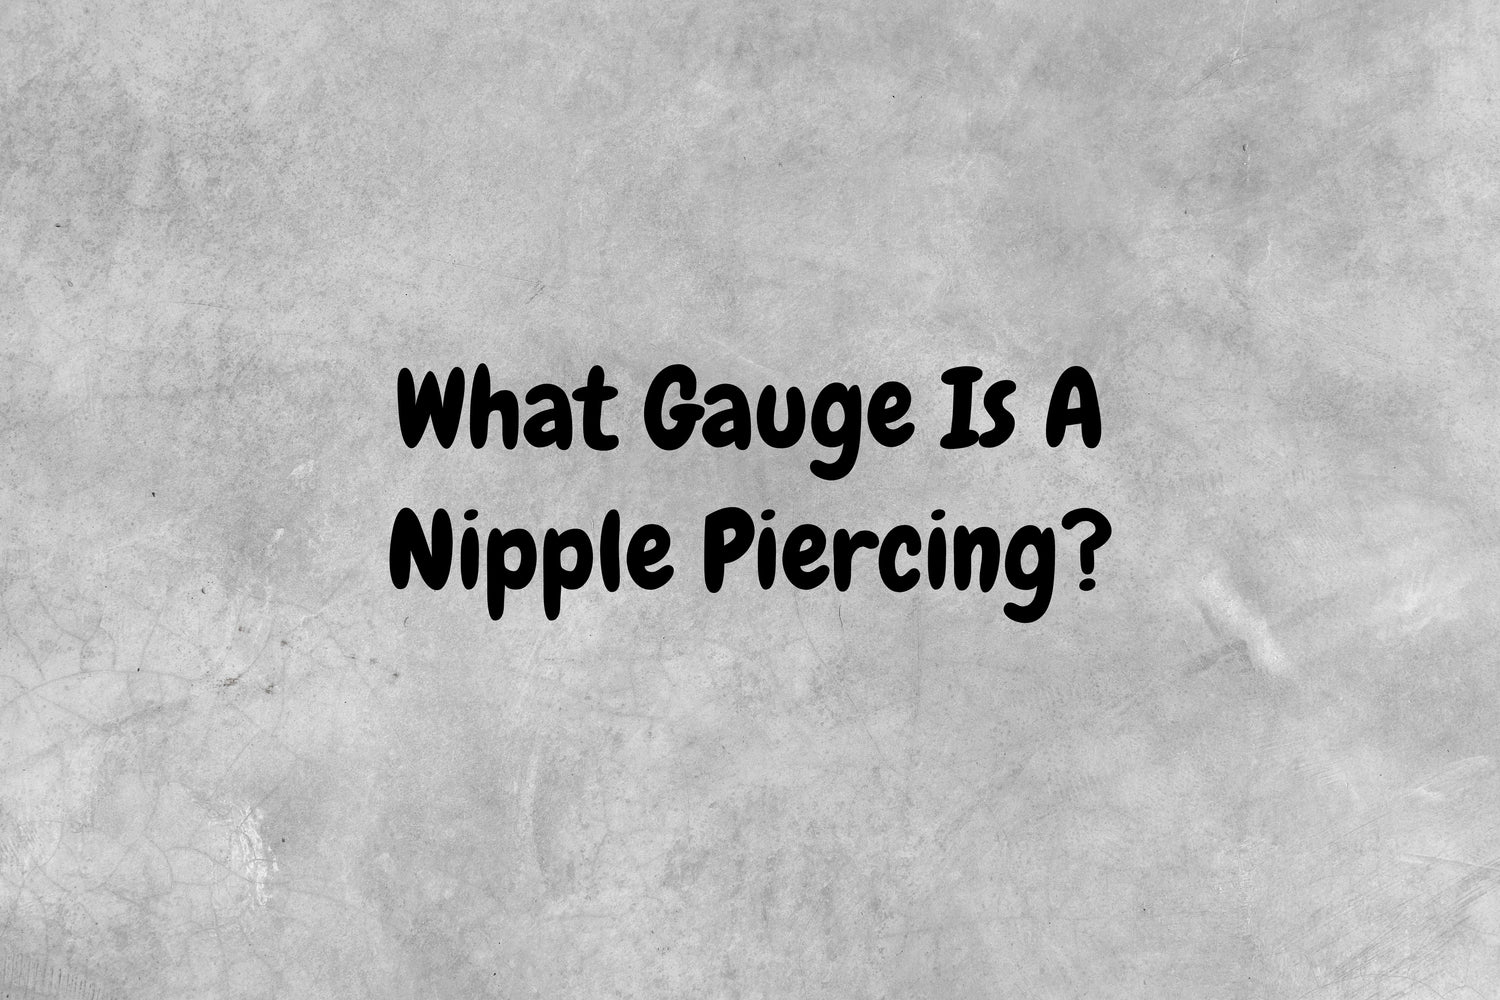 A gray background featuring black text that questions "What gauge is a nipple piercing?"